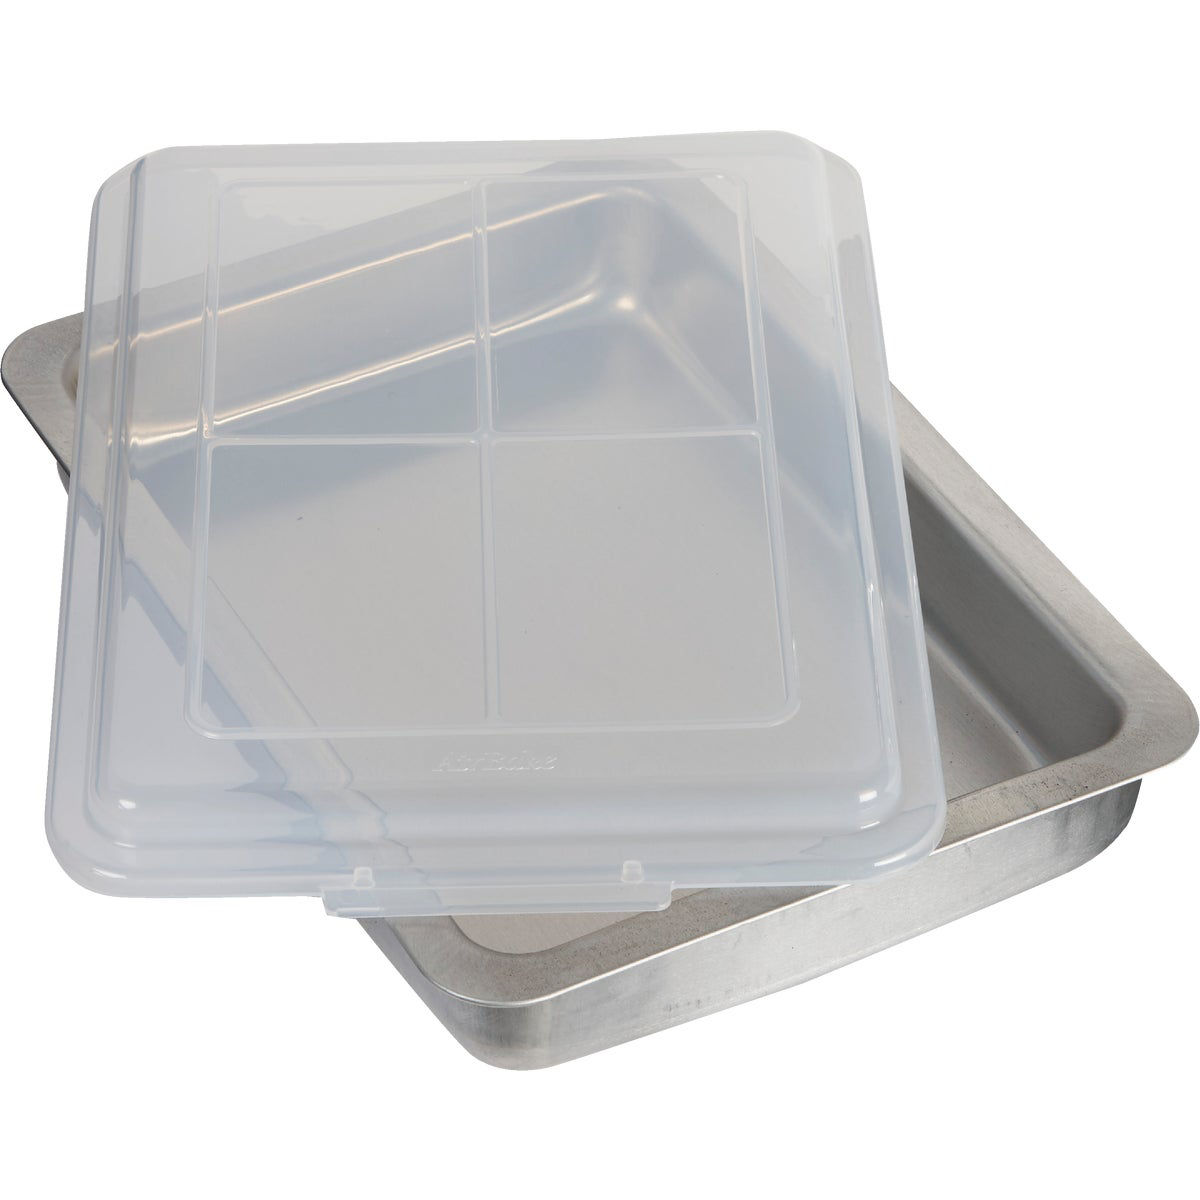 T-Fal Airbake Natural Large Cookie Sheet with Covered Cake Pan Set 